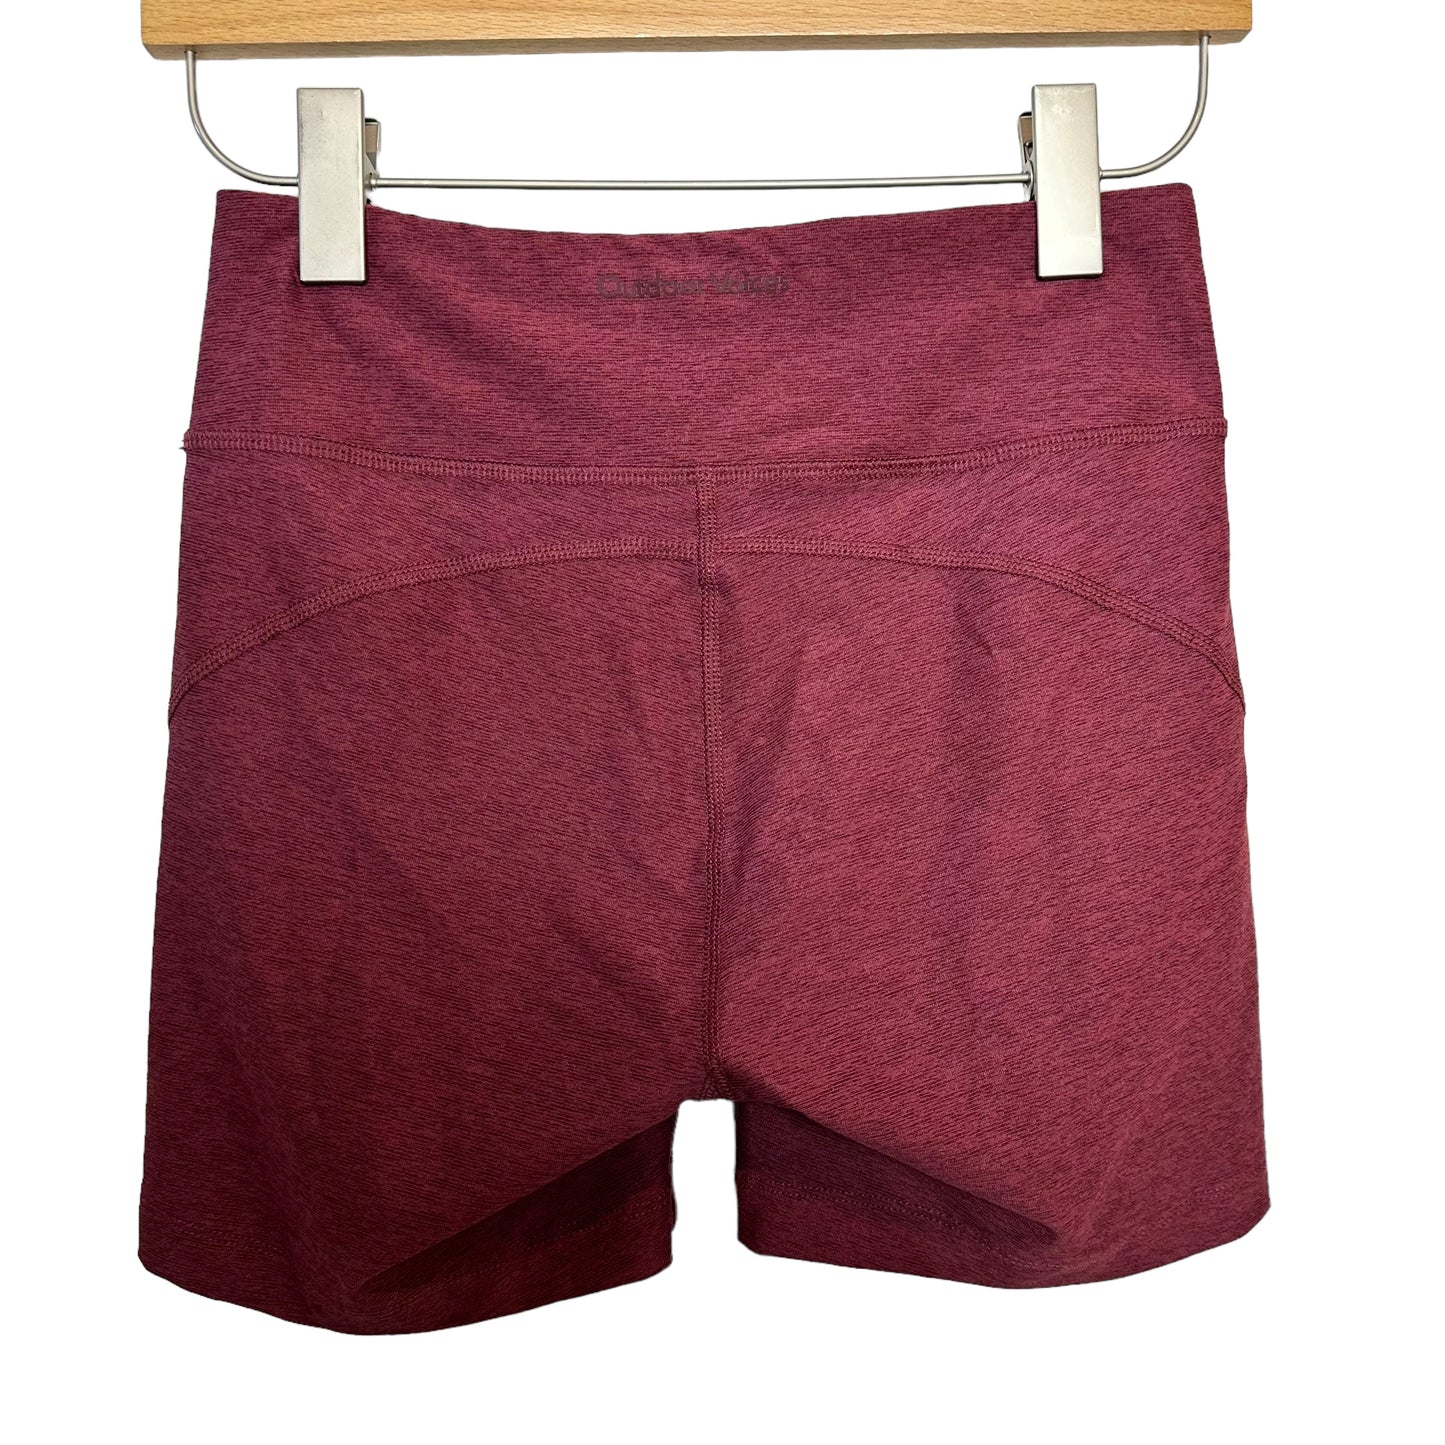 Outdoor Voices Warmup 5" Short Shiraz Burgundy Red Bike Shorts Small